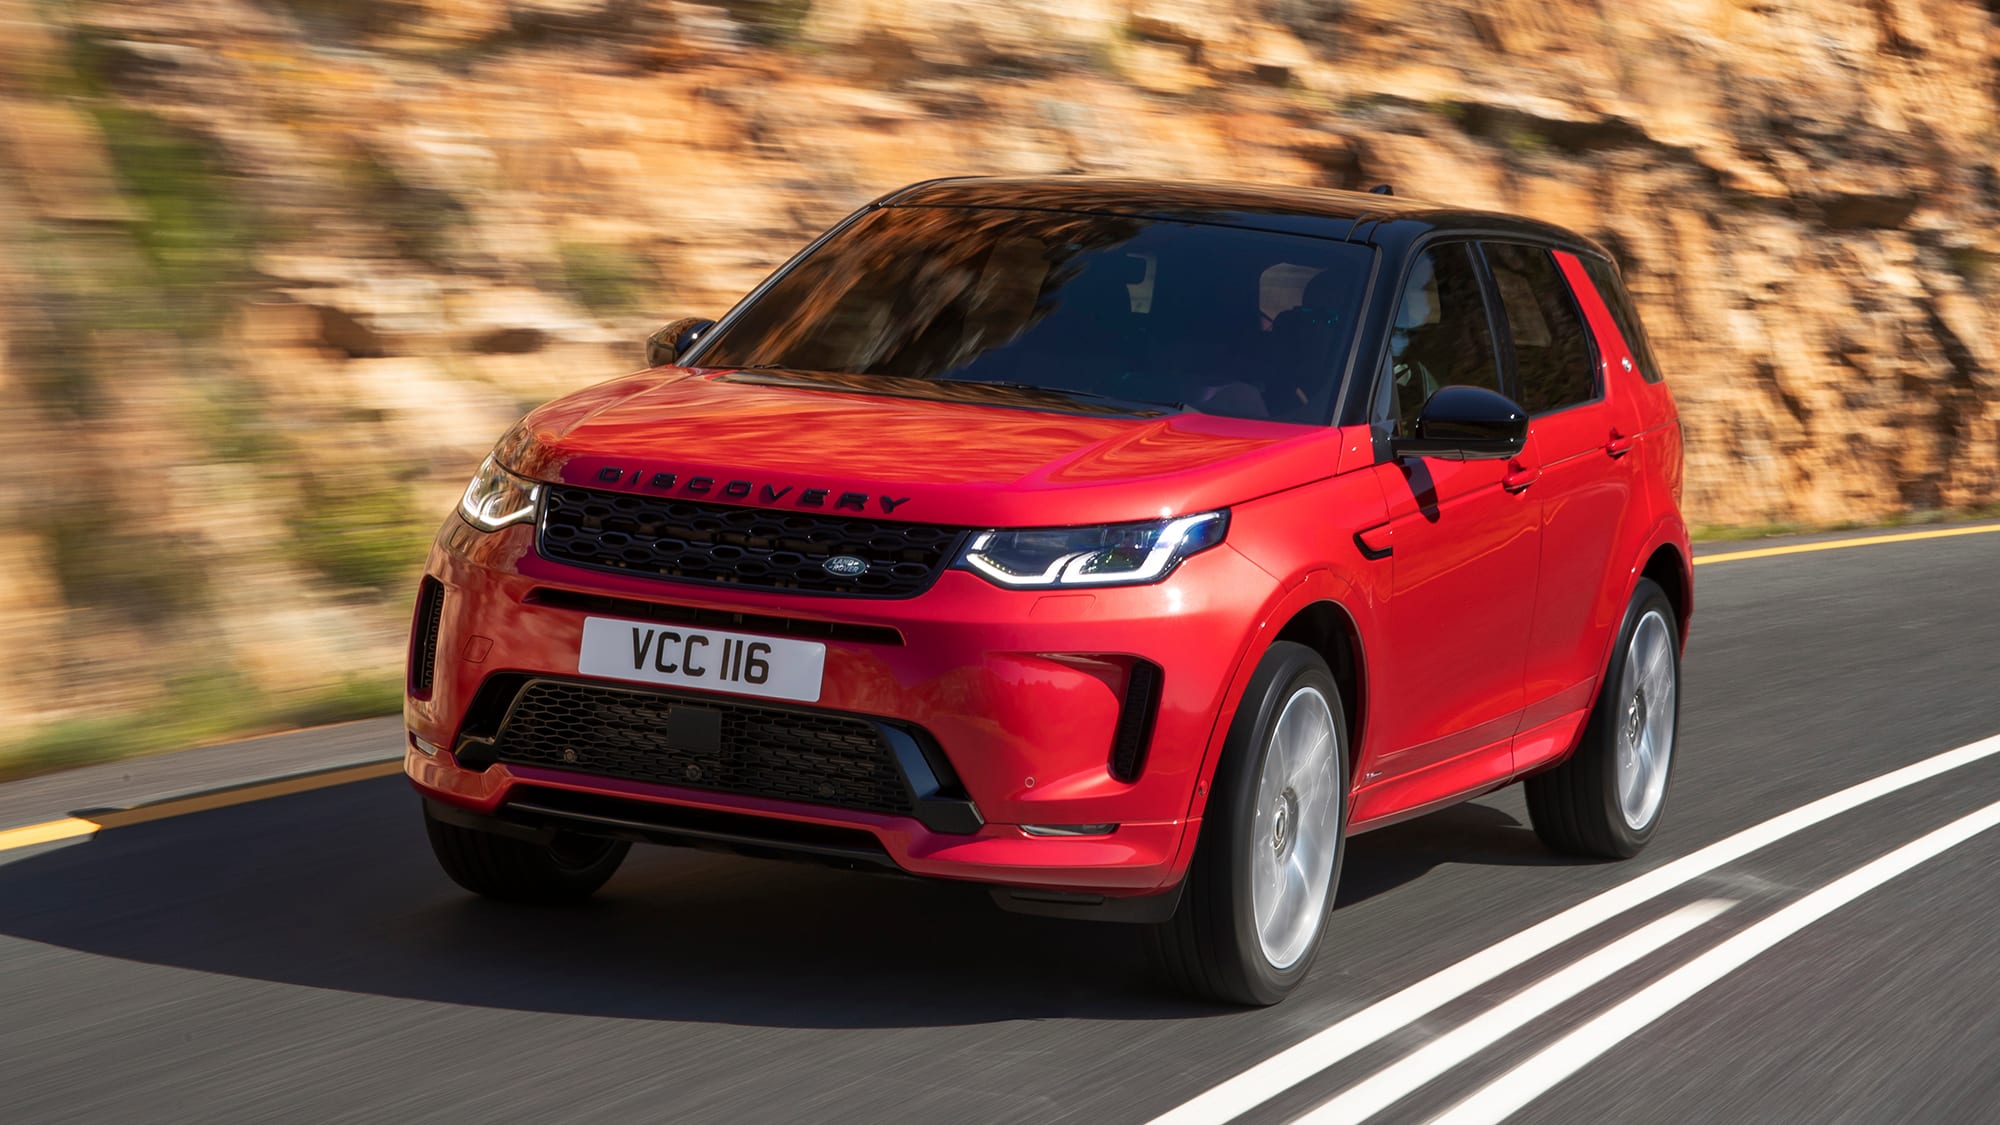 2020 Land Rover Discovery Sport Revealed On Sale Now Caradvice